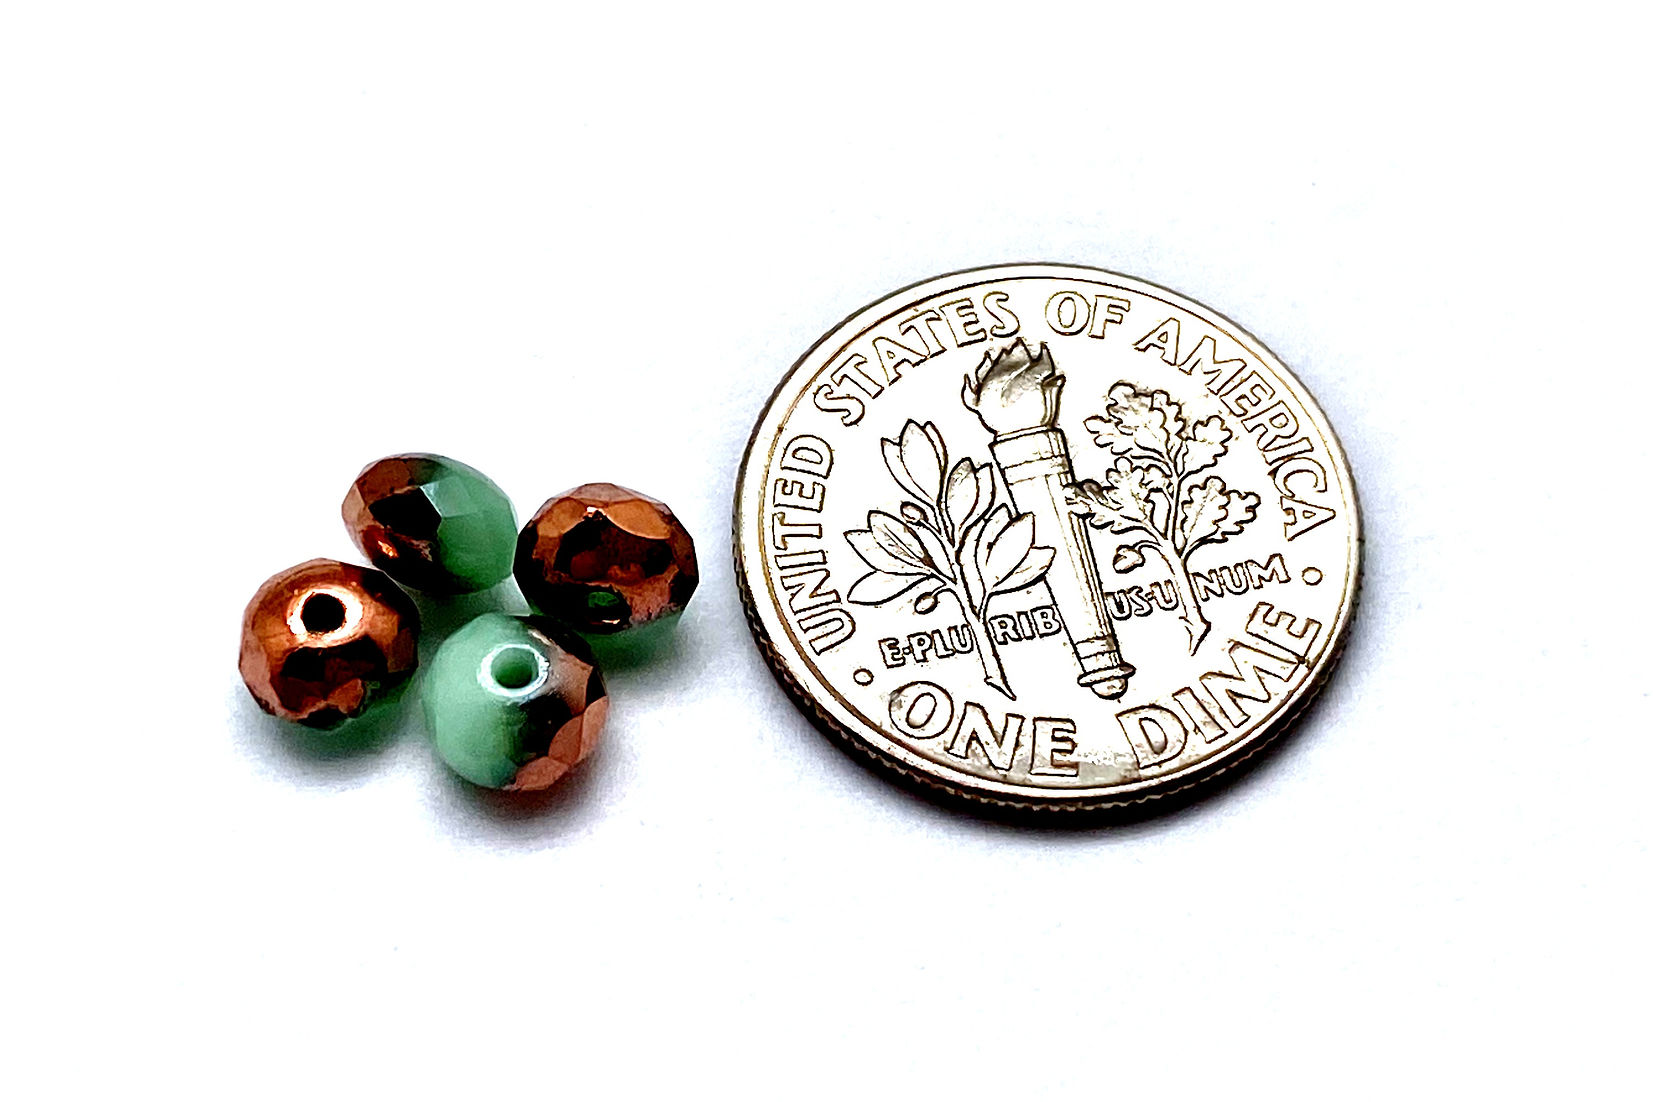 6mm Glass Beads - Seafoam Green & White with Copper Wash - 50 or